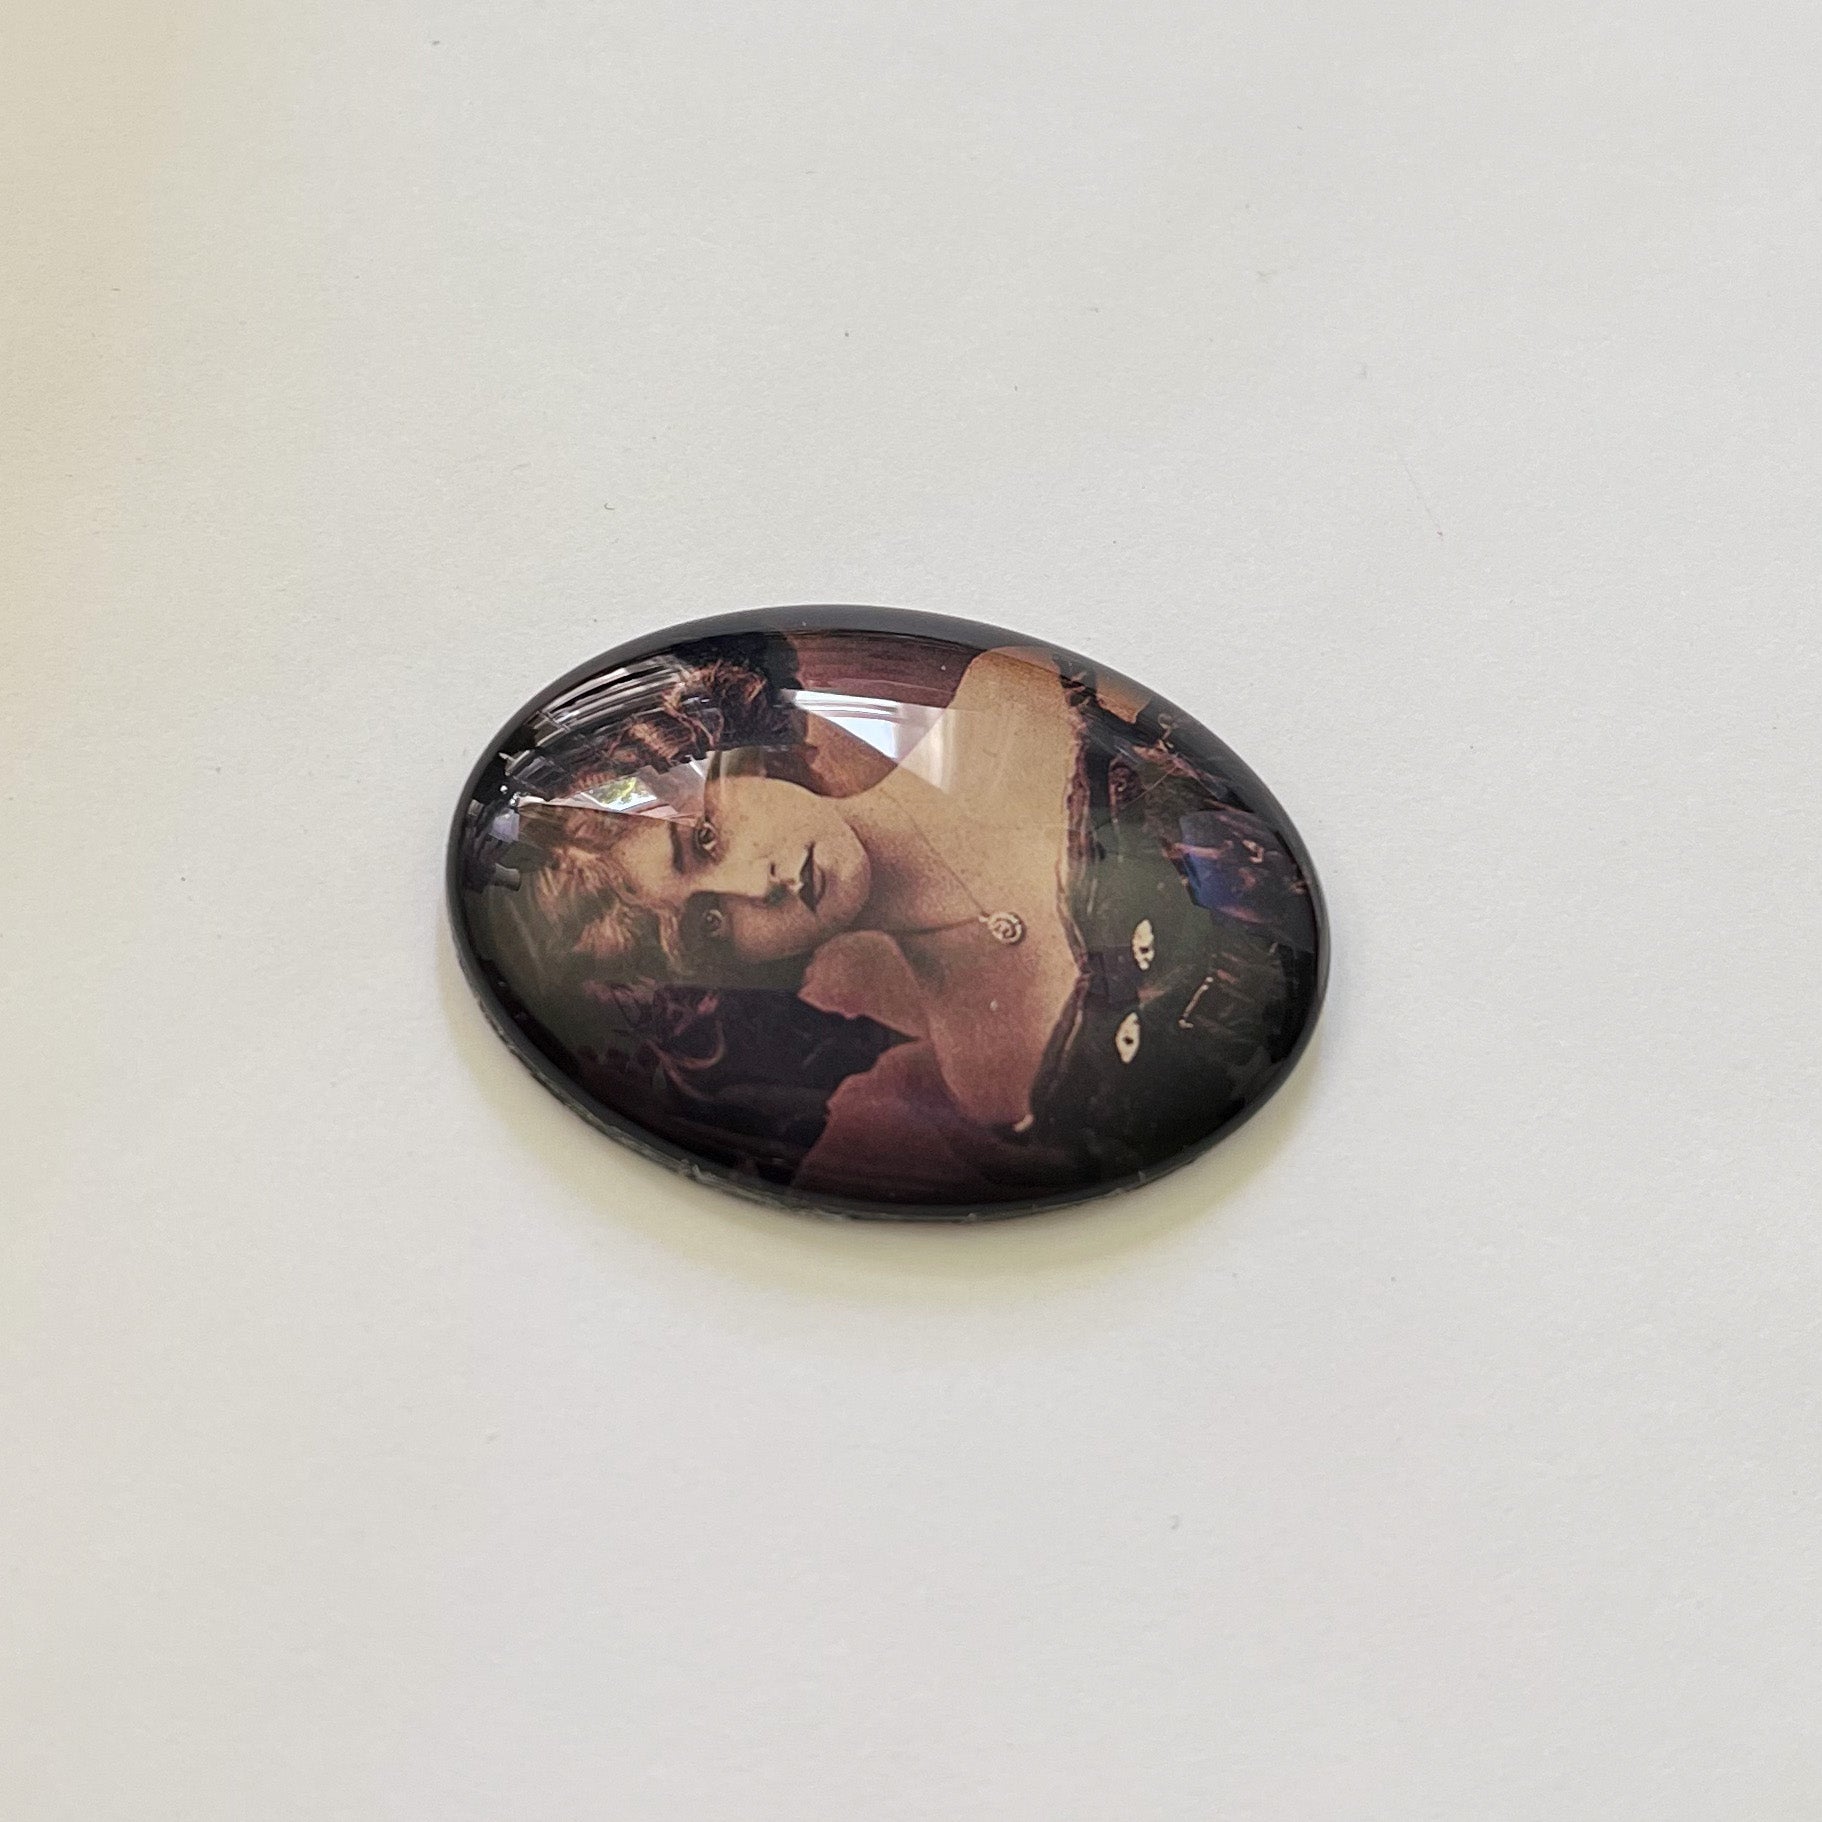 Mysterious Victorian Woman Photo Glass Cameo Cabochon